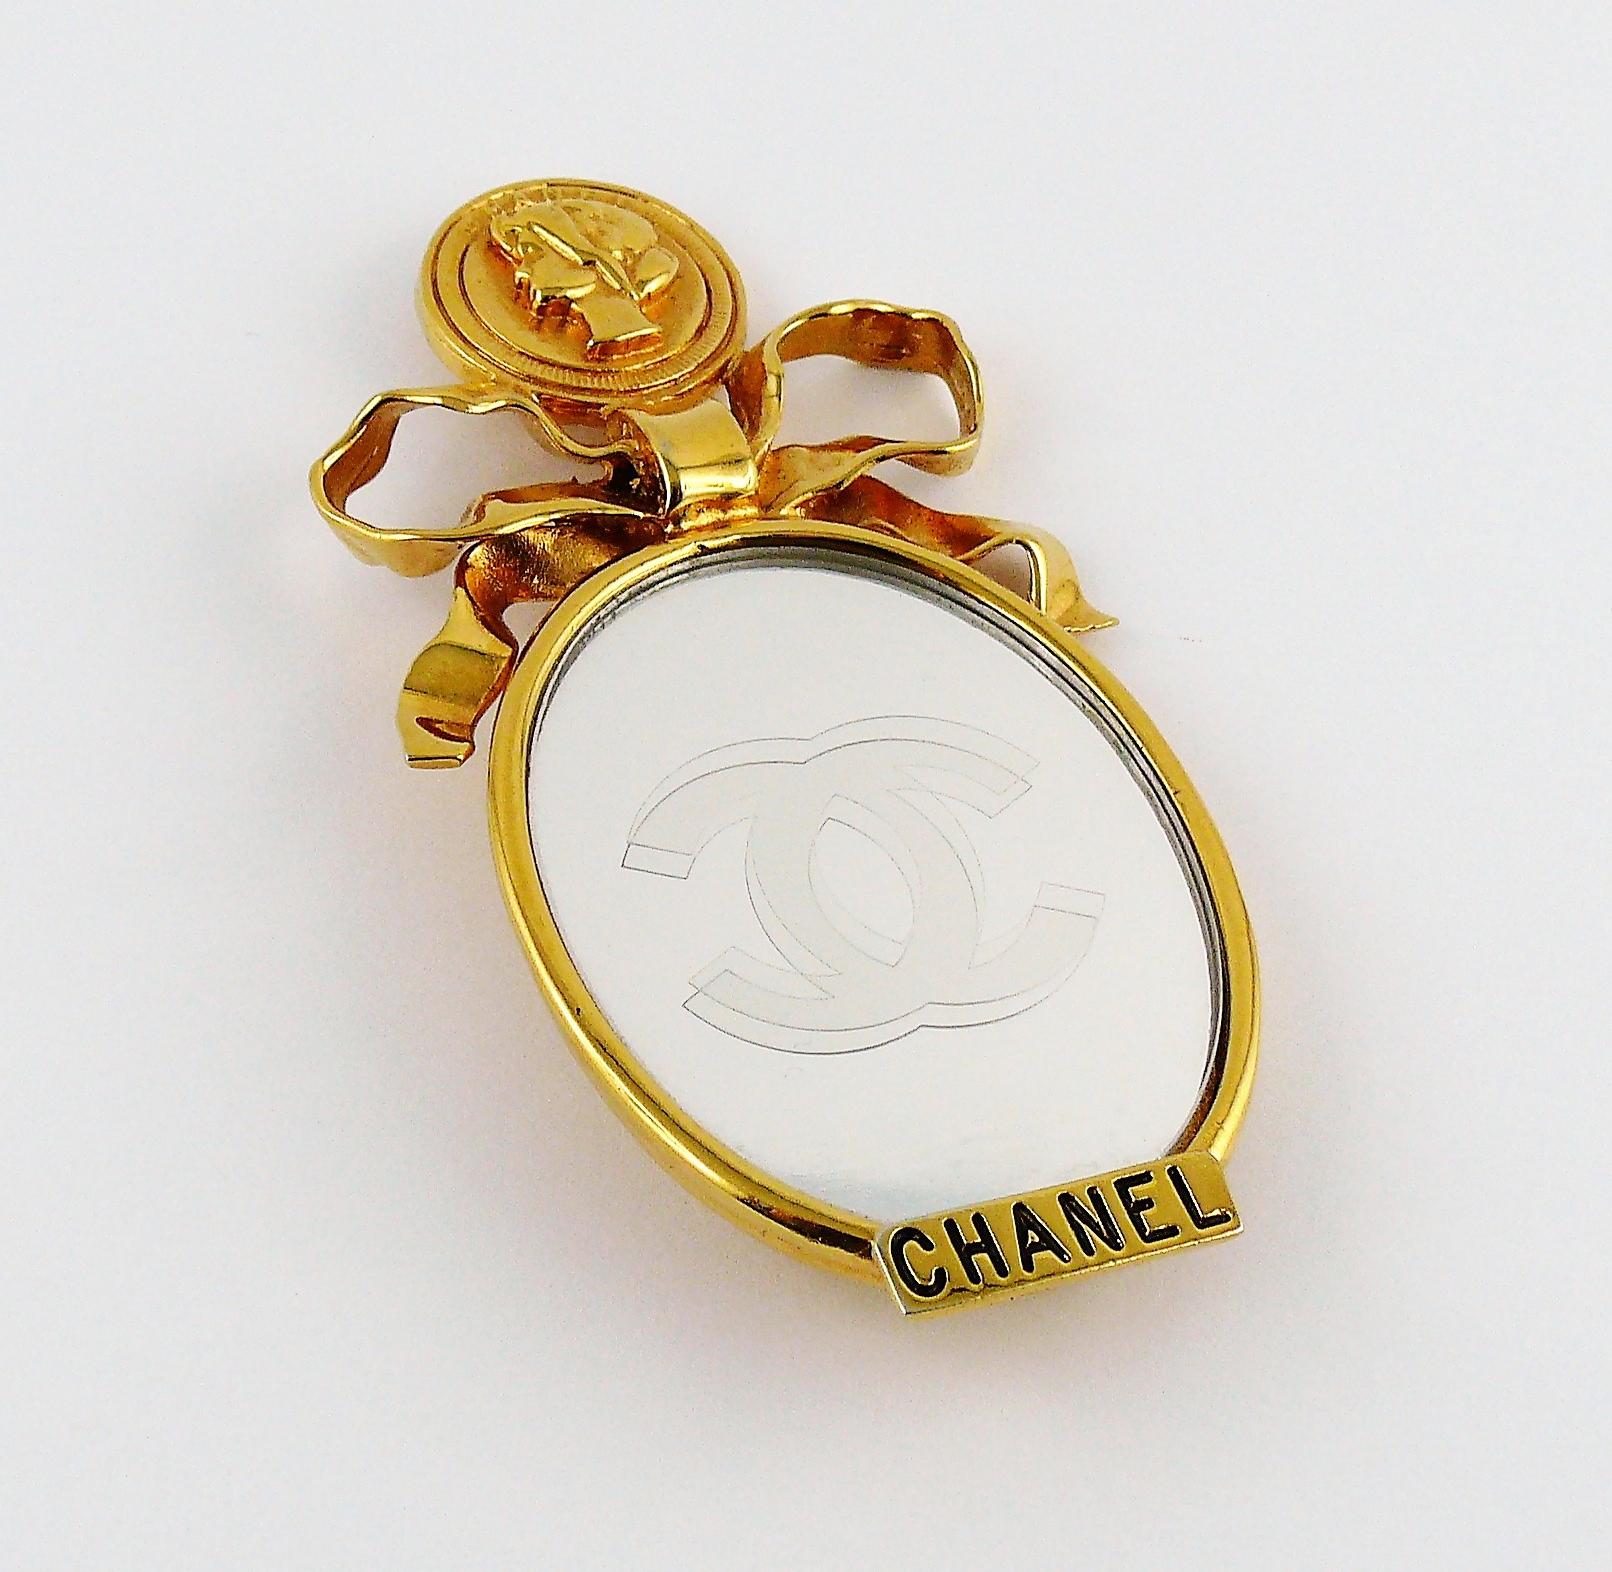 CHANEL vintage rare massive gold toned brooch featuring Mademoiselle figure at the top accentuated with a big bow, oval mirror with frosted CC logo at the center, embossed CHANEL in black at the bottom.

Embossed CHANEL on the reverse